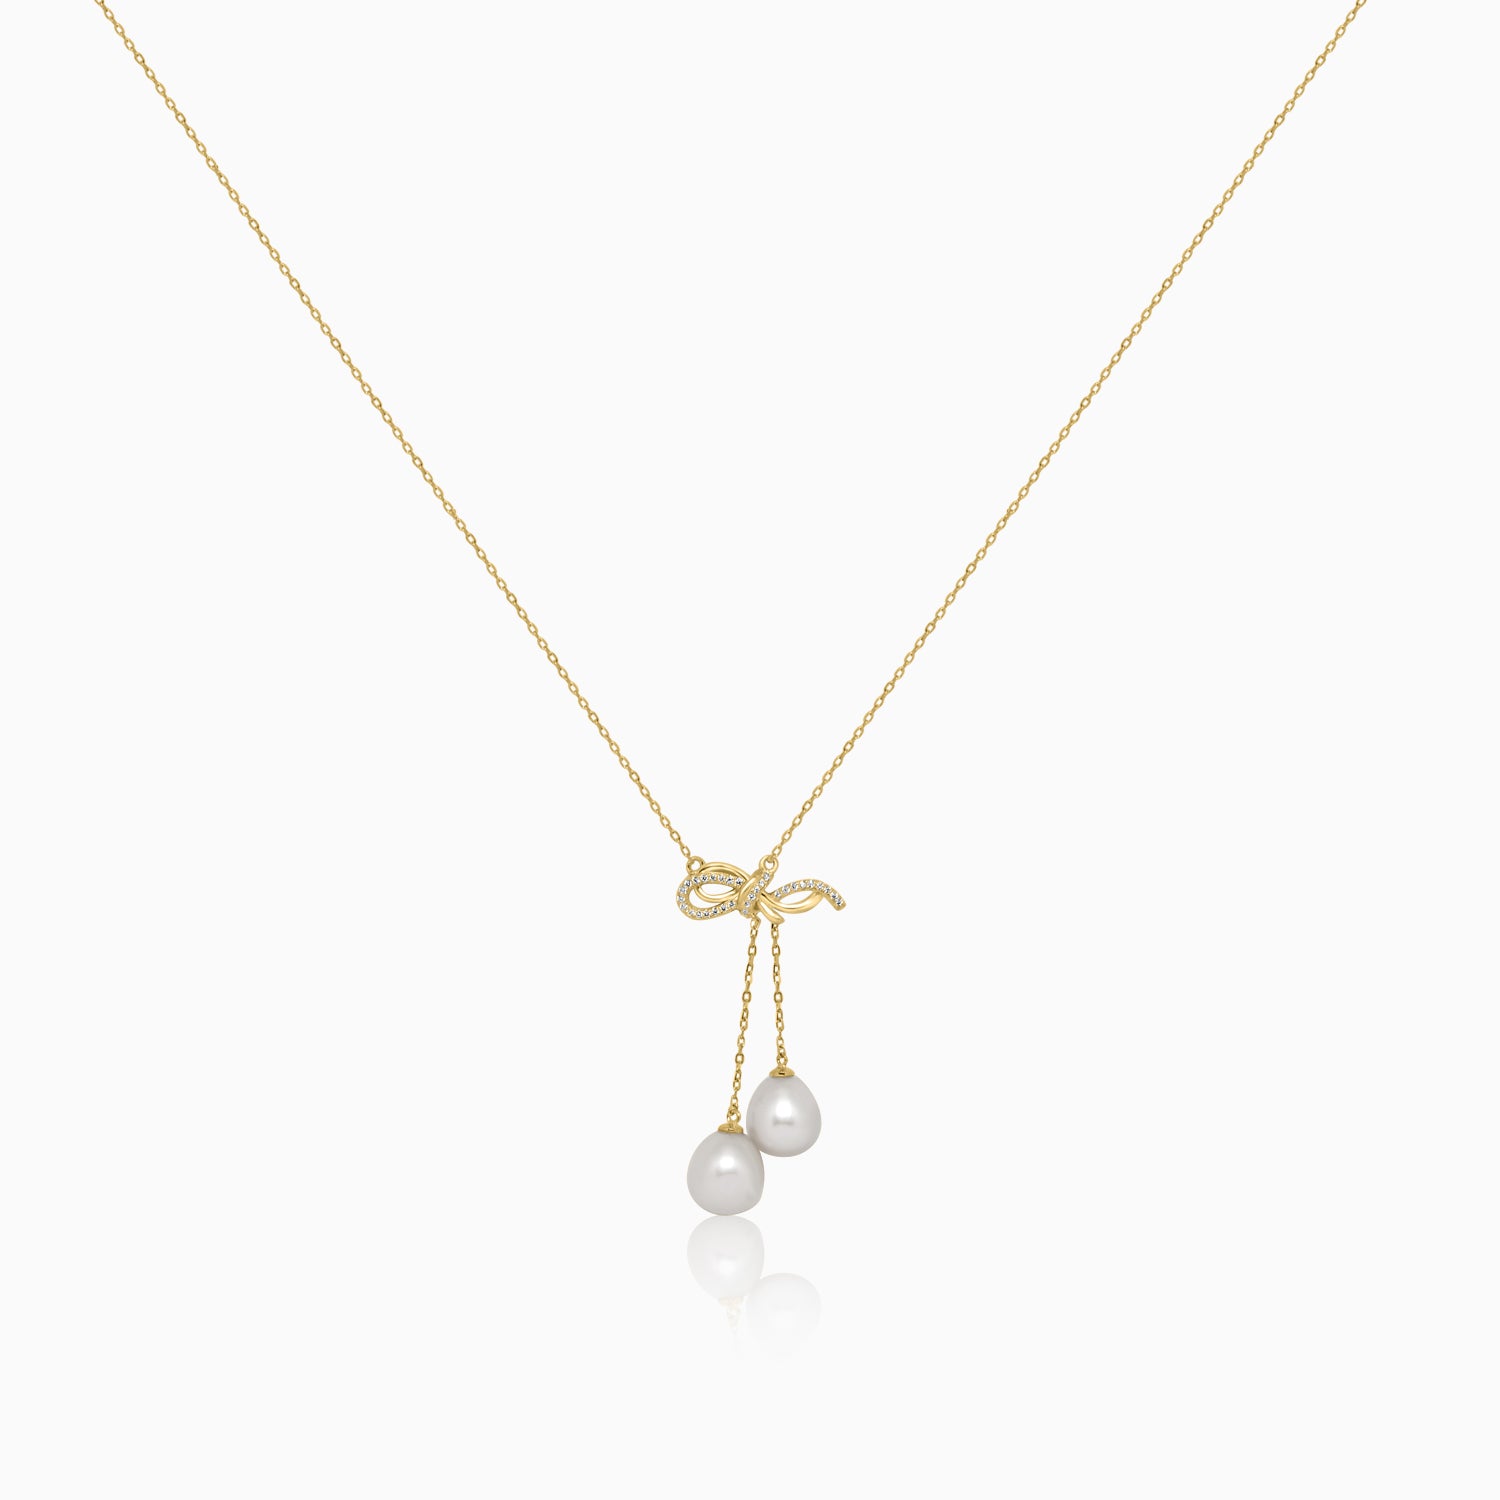 Silver Gold Sparkling Knot Dangling Pearls Necklace